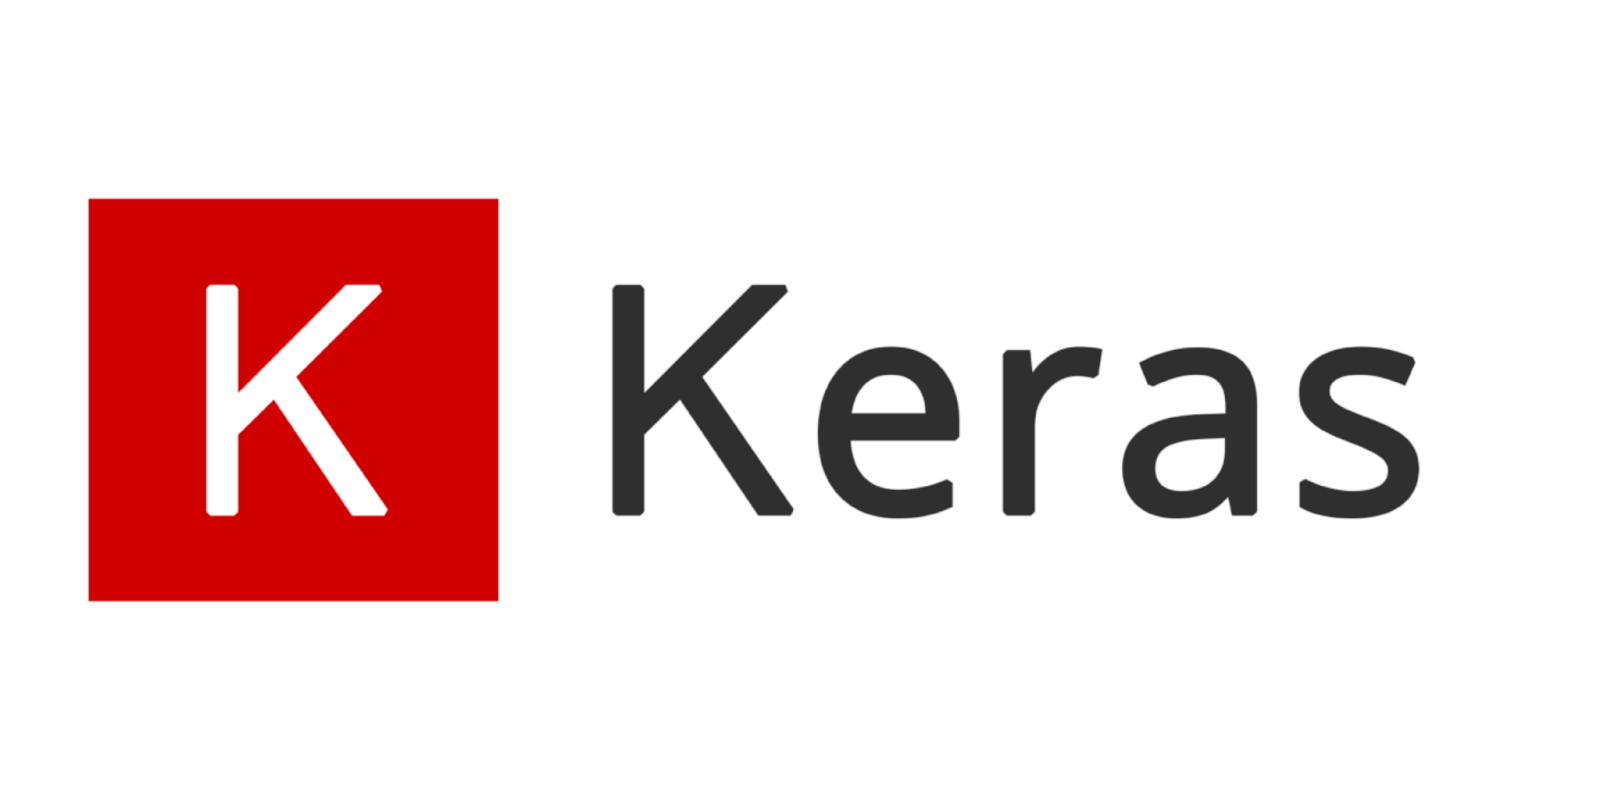 What Is Keras..